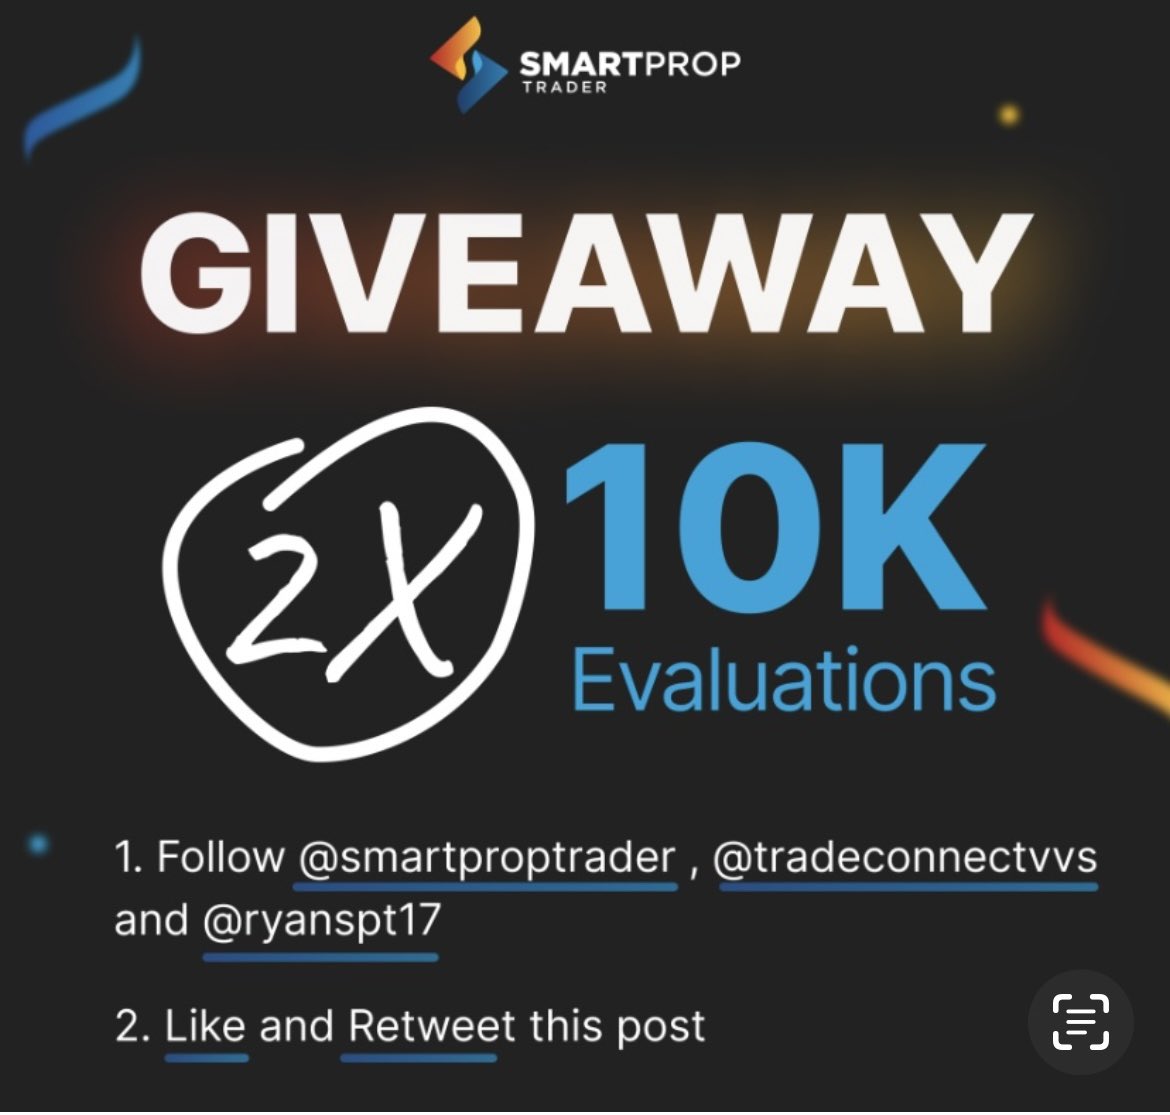 $10000 Prop Acc GIVEAWAY🎉 to 2 active followers 

Criteria to Win ⬇️
•You Must be Following @kingsolomon4lyf & @RyanSPT17
• You must be following @SmartPropTrader & @TradeConnectVVS
•Like, Retweet and tag 3 friends in the comment
•Selecting winners after 48hrs... Lfg 🔥🥂💯